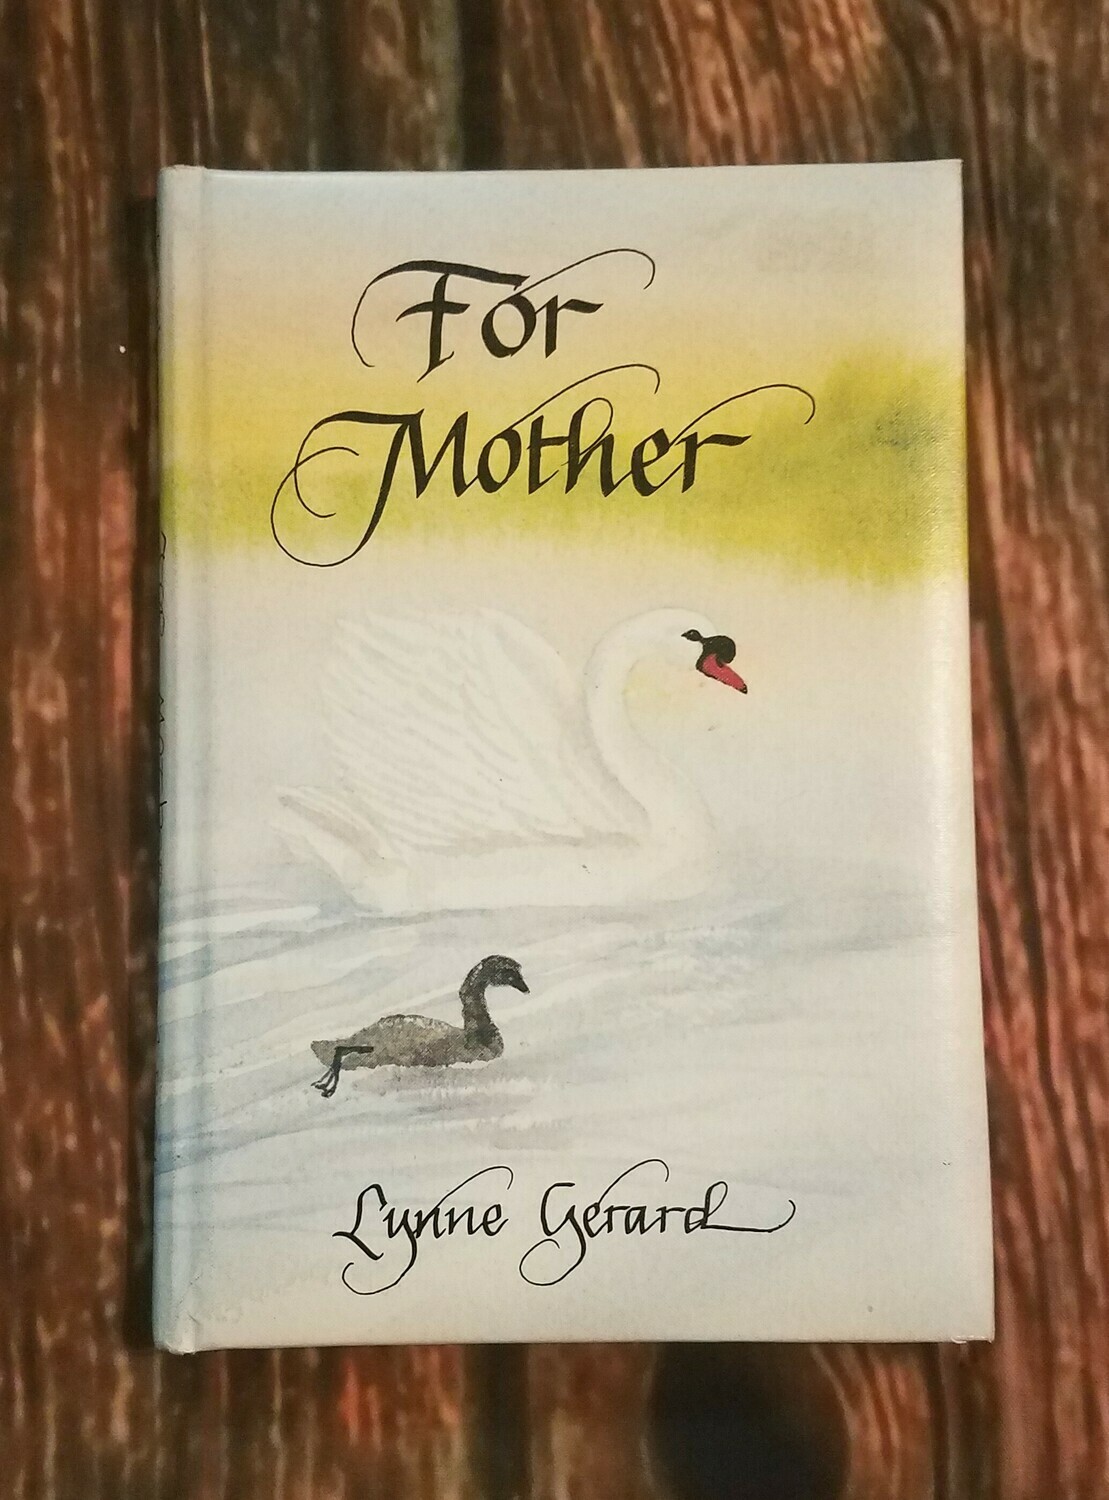 For Mother by Lynne Gerard and C.R. Gibson